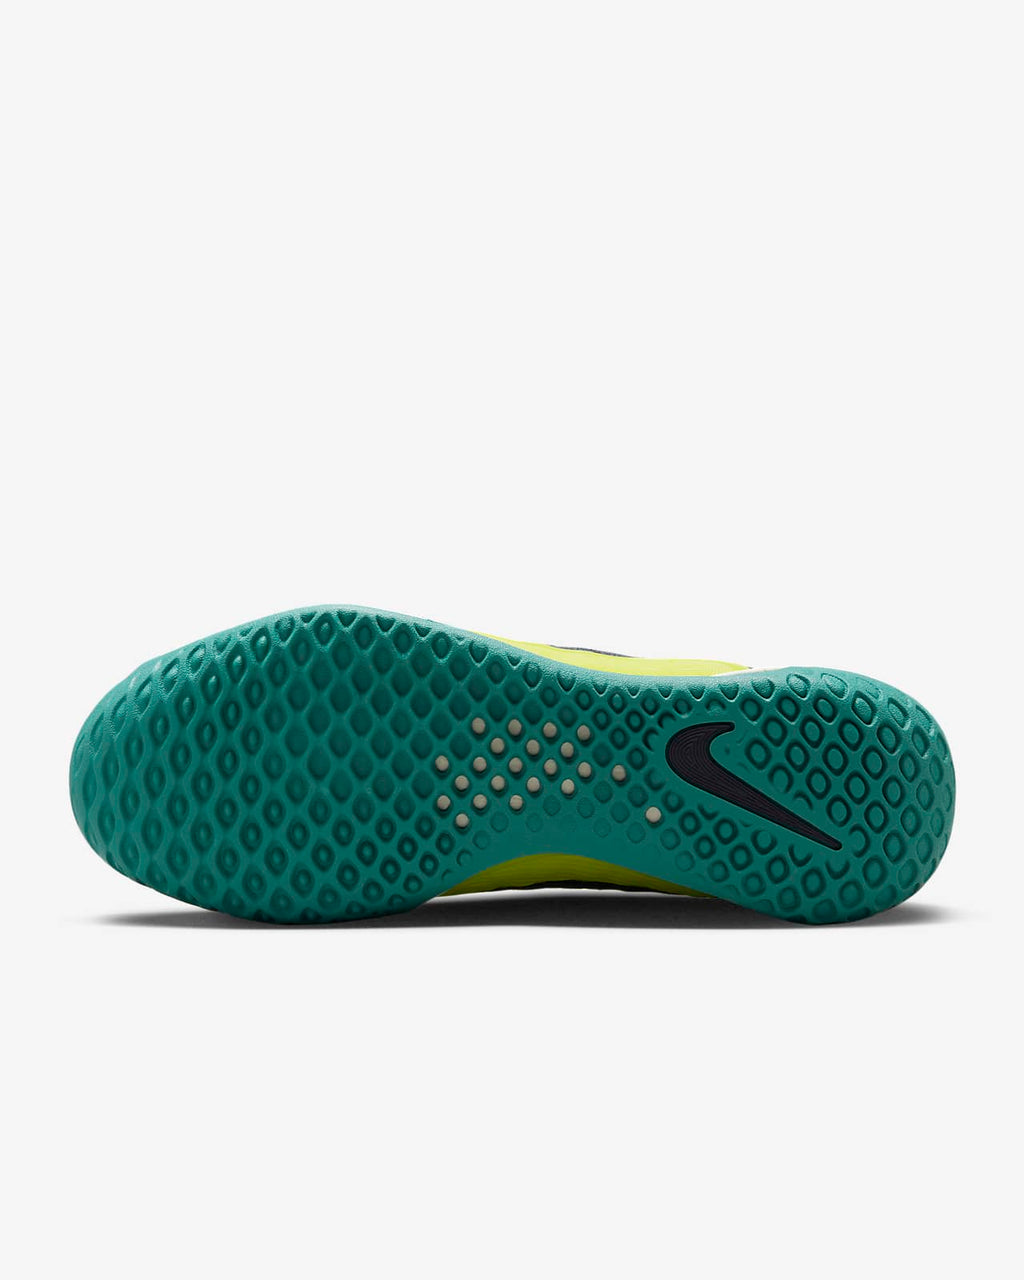 Nike Court Air Zoom NXT HC - Mineral Teal/Gridiron Blue – T1 SPORTS